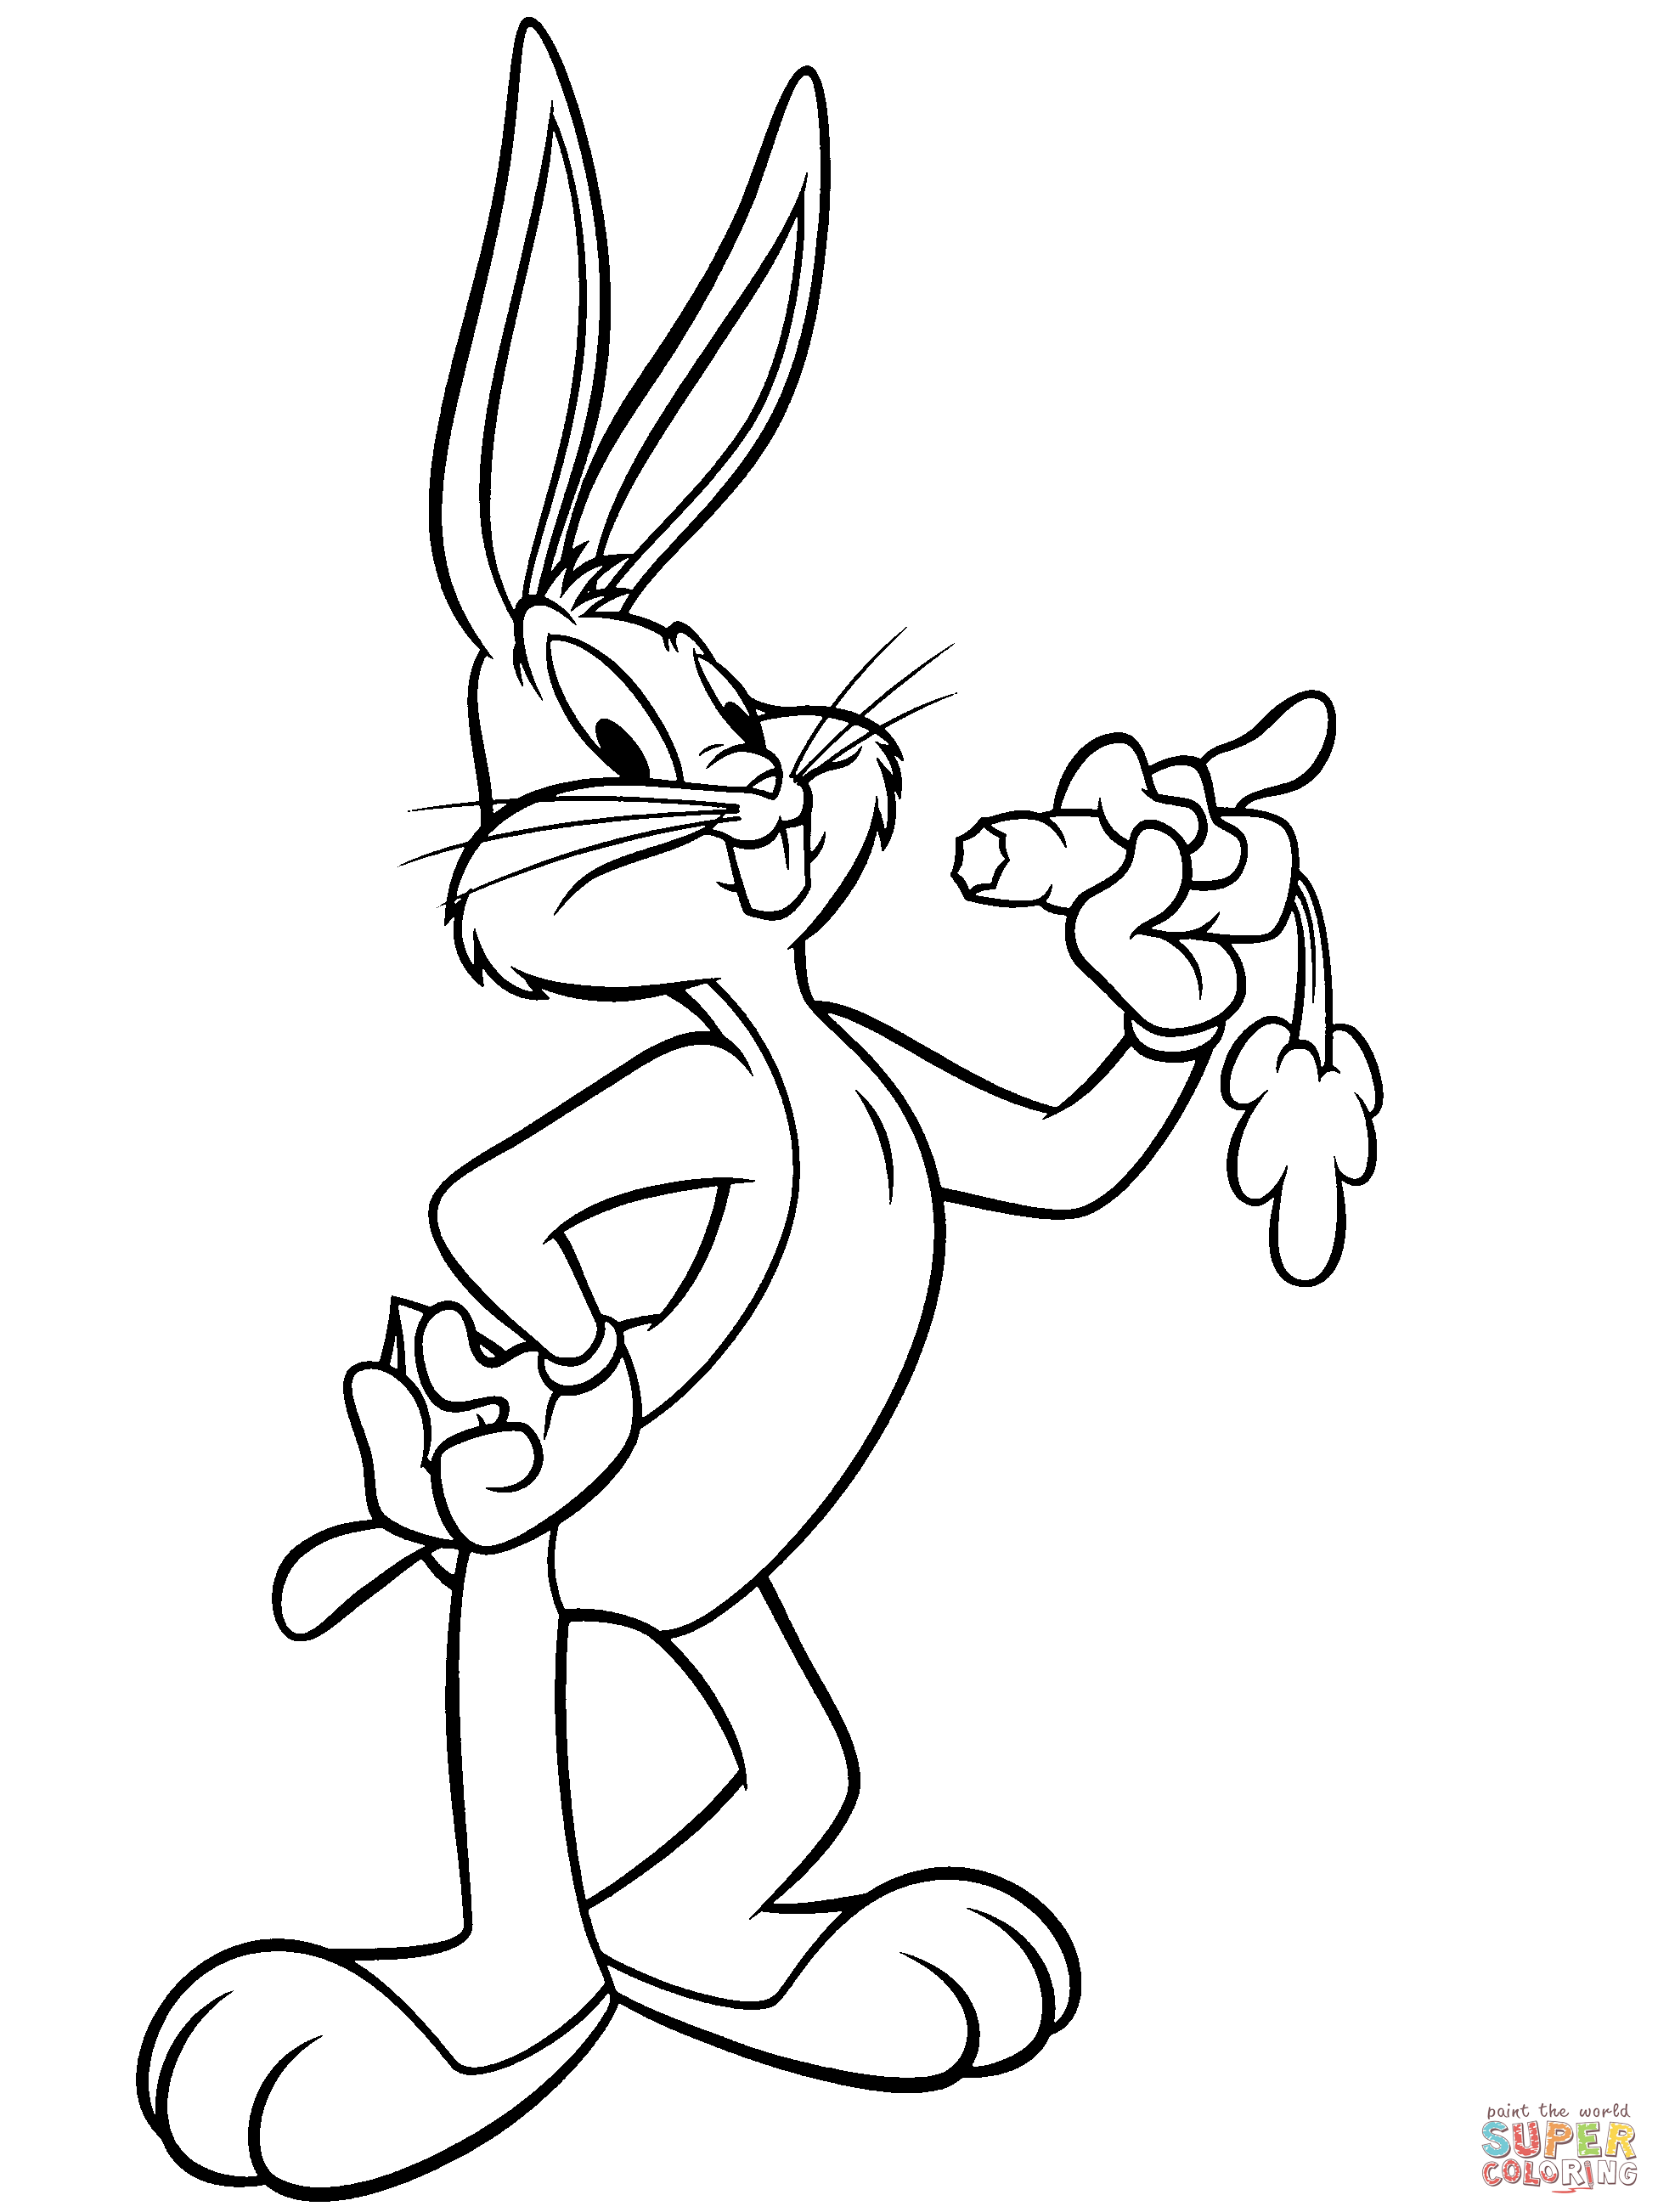 Bugs Bunny coloring pages | Free Coloring Pages